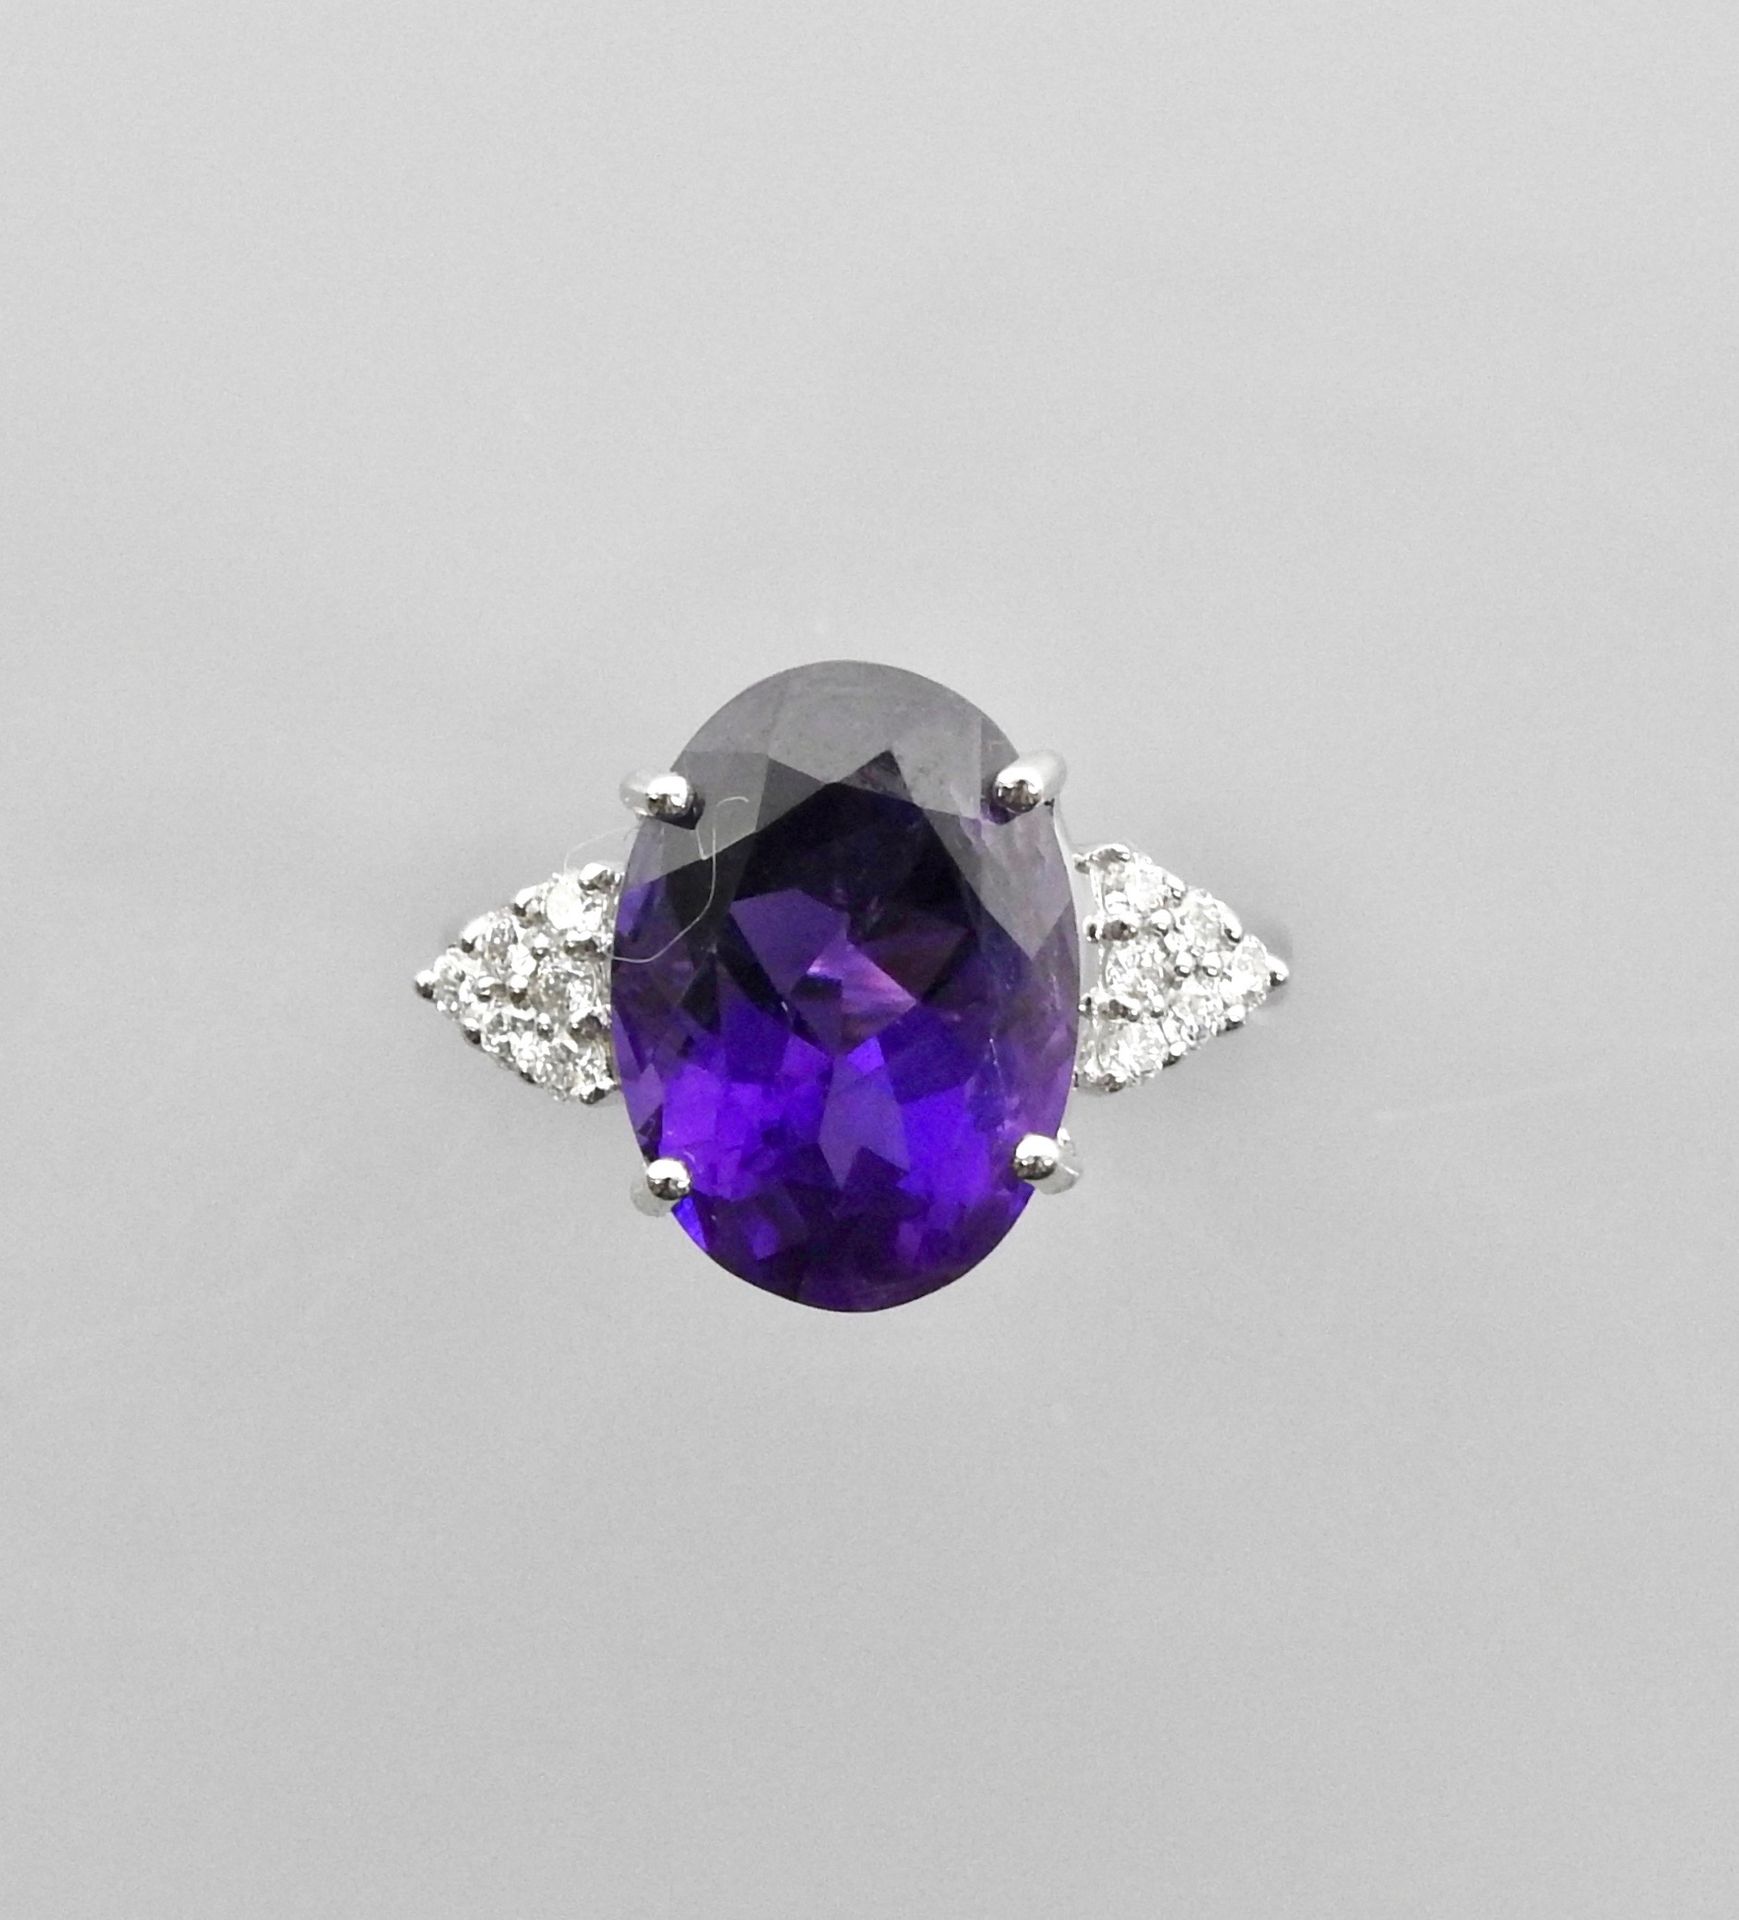 Null Ring in white gold, 750 MM, set with an oval amethyst weighing 6.50 carats,&hellip;